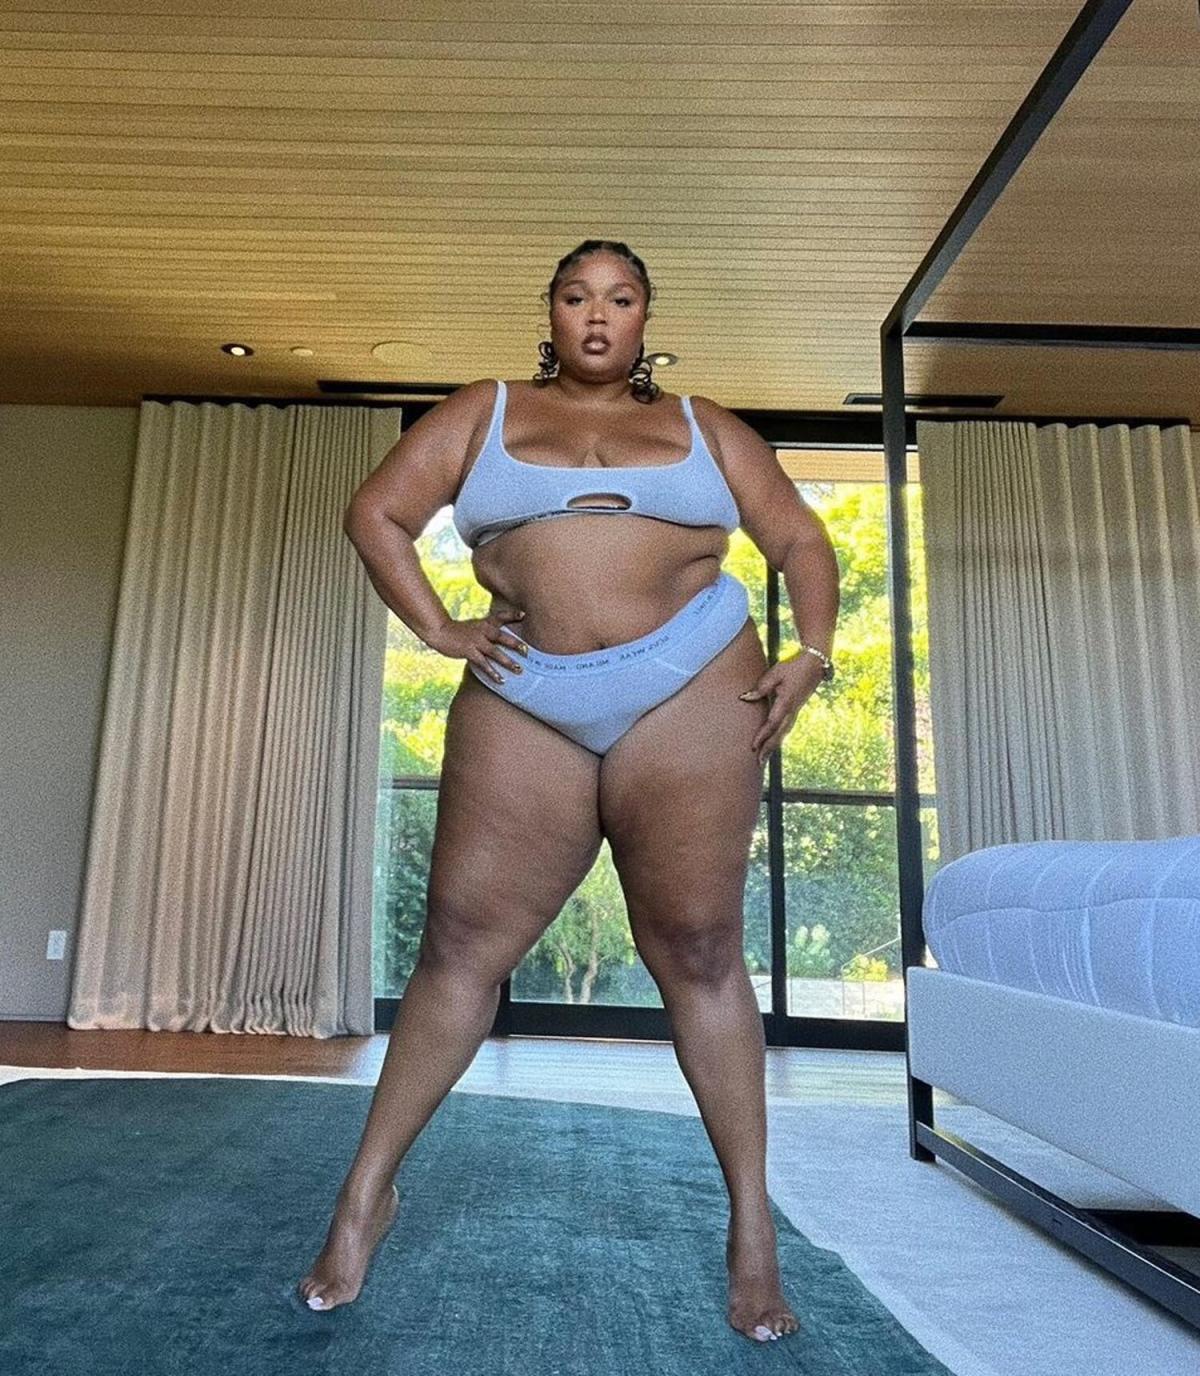 Nude People On Imagefap - Lizzo Strikes a Sexy Pose in Her Bra and Underwear